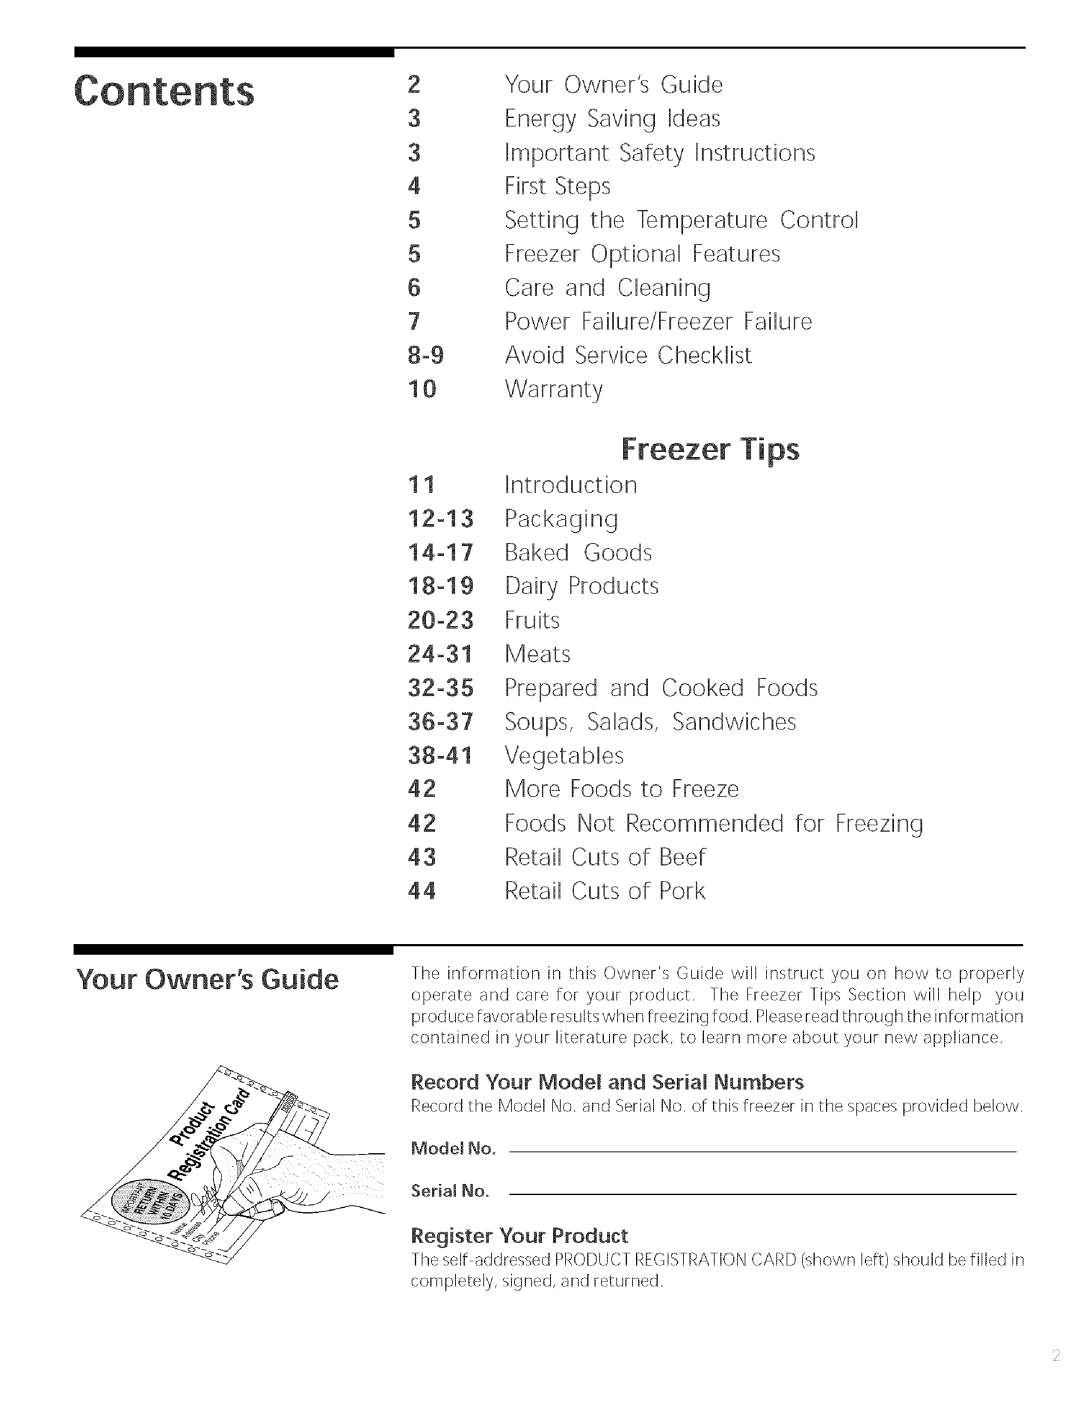 Sears 216769700 manual Your Owners Guide, Freezer Tips 